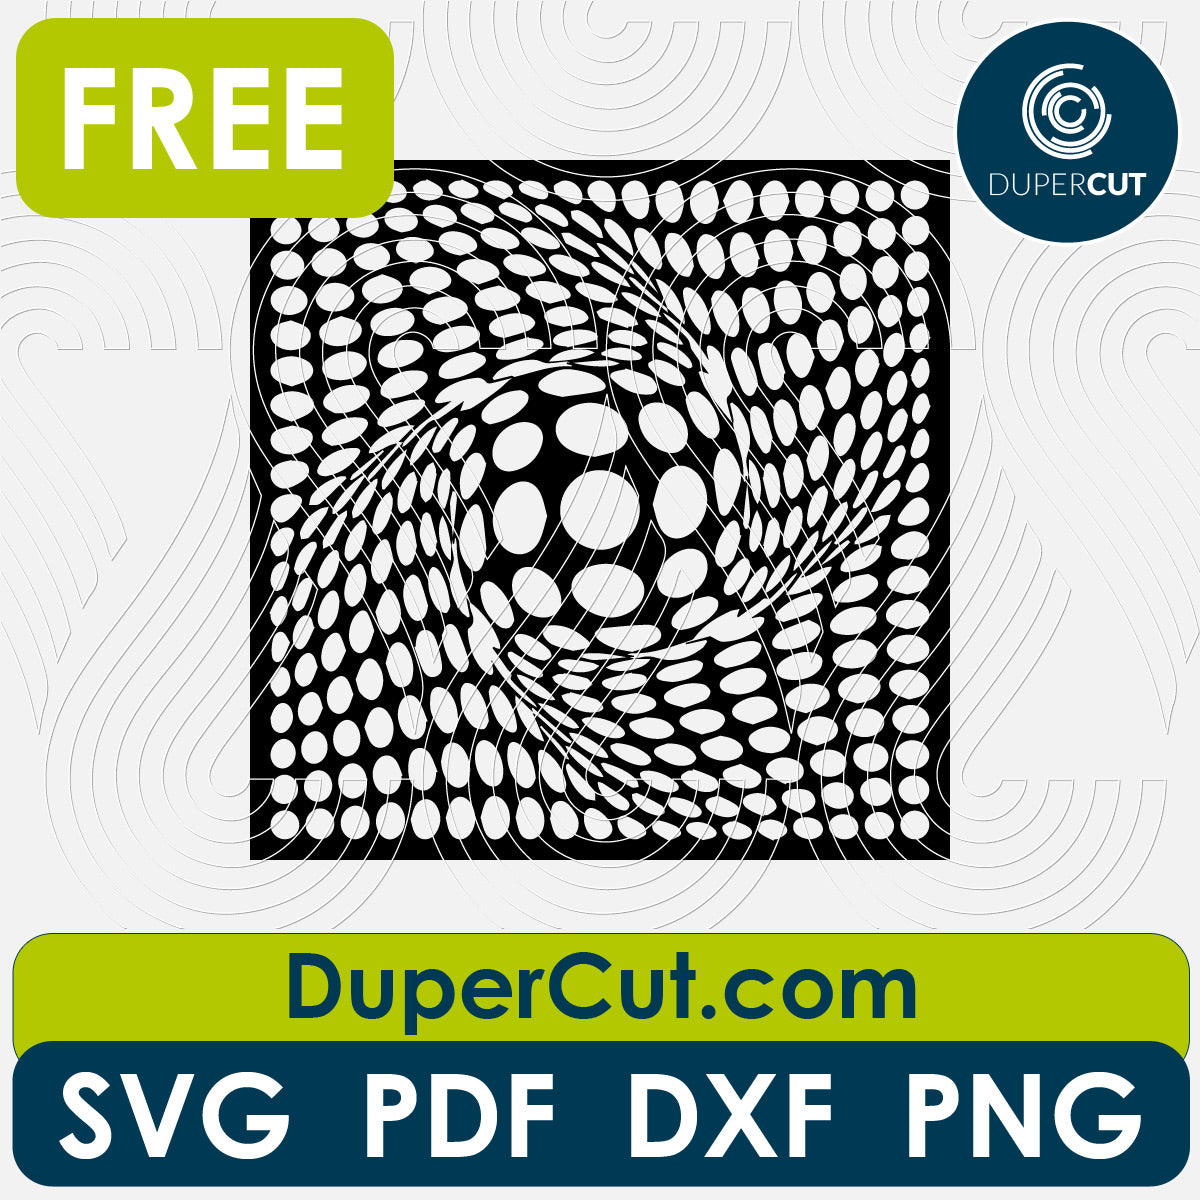 Optical illusion square pattern - free SVG PNG DXF vector files for laser and blade cutting machines. Glowforge, Cricut, Silhouette cameo templates by DuperCut.com